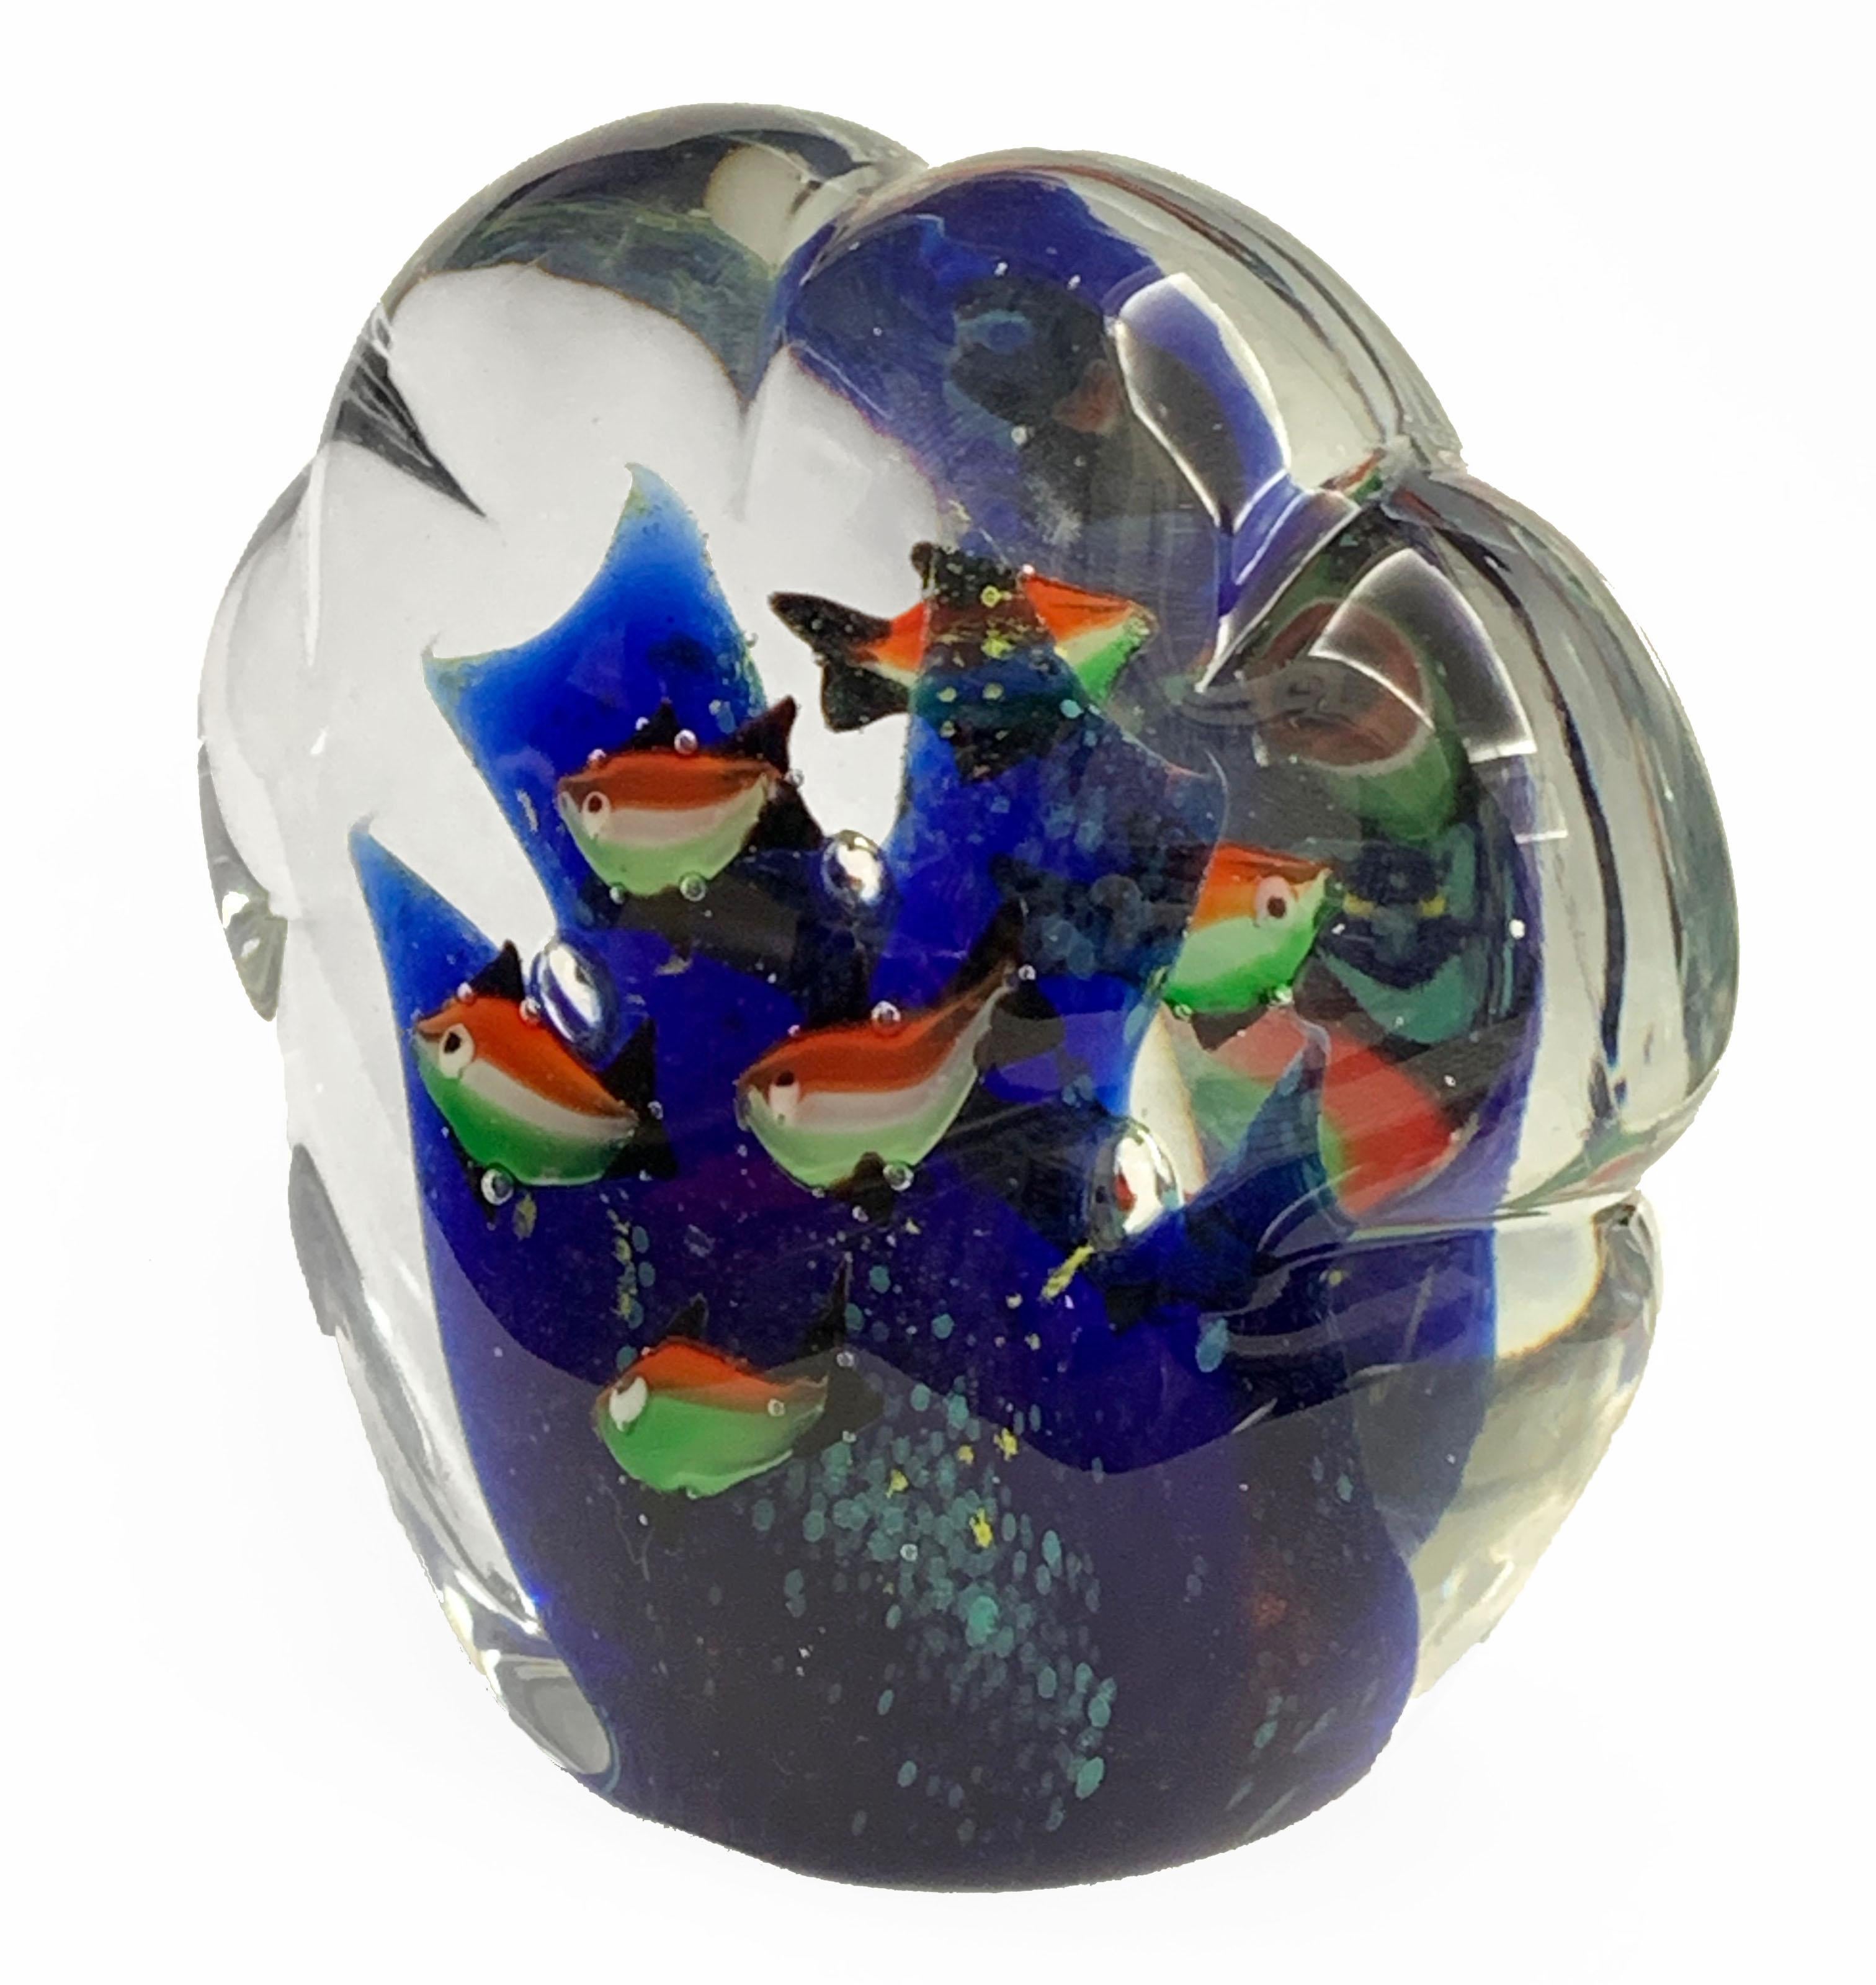 Mid-Century Modern Paperweight Sculpture for Aquarium in White, Blue, Red and Green Murano Glass